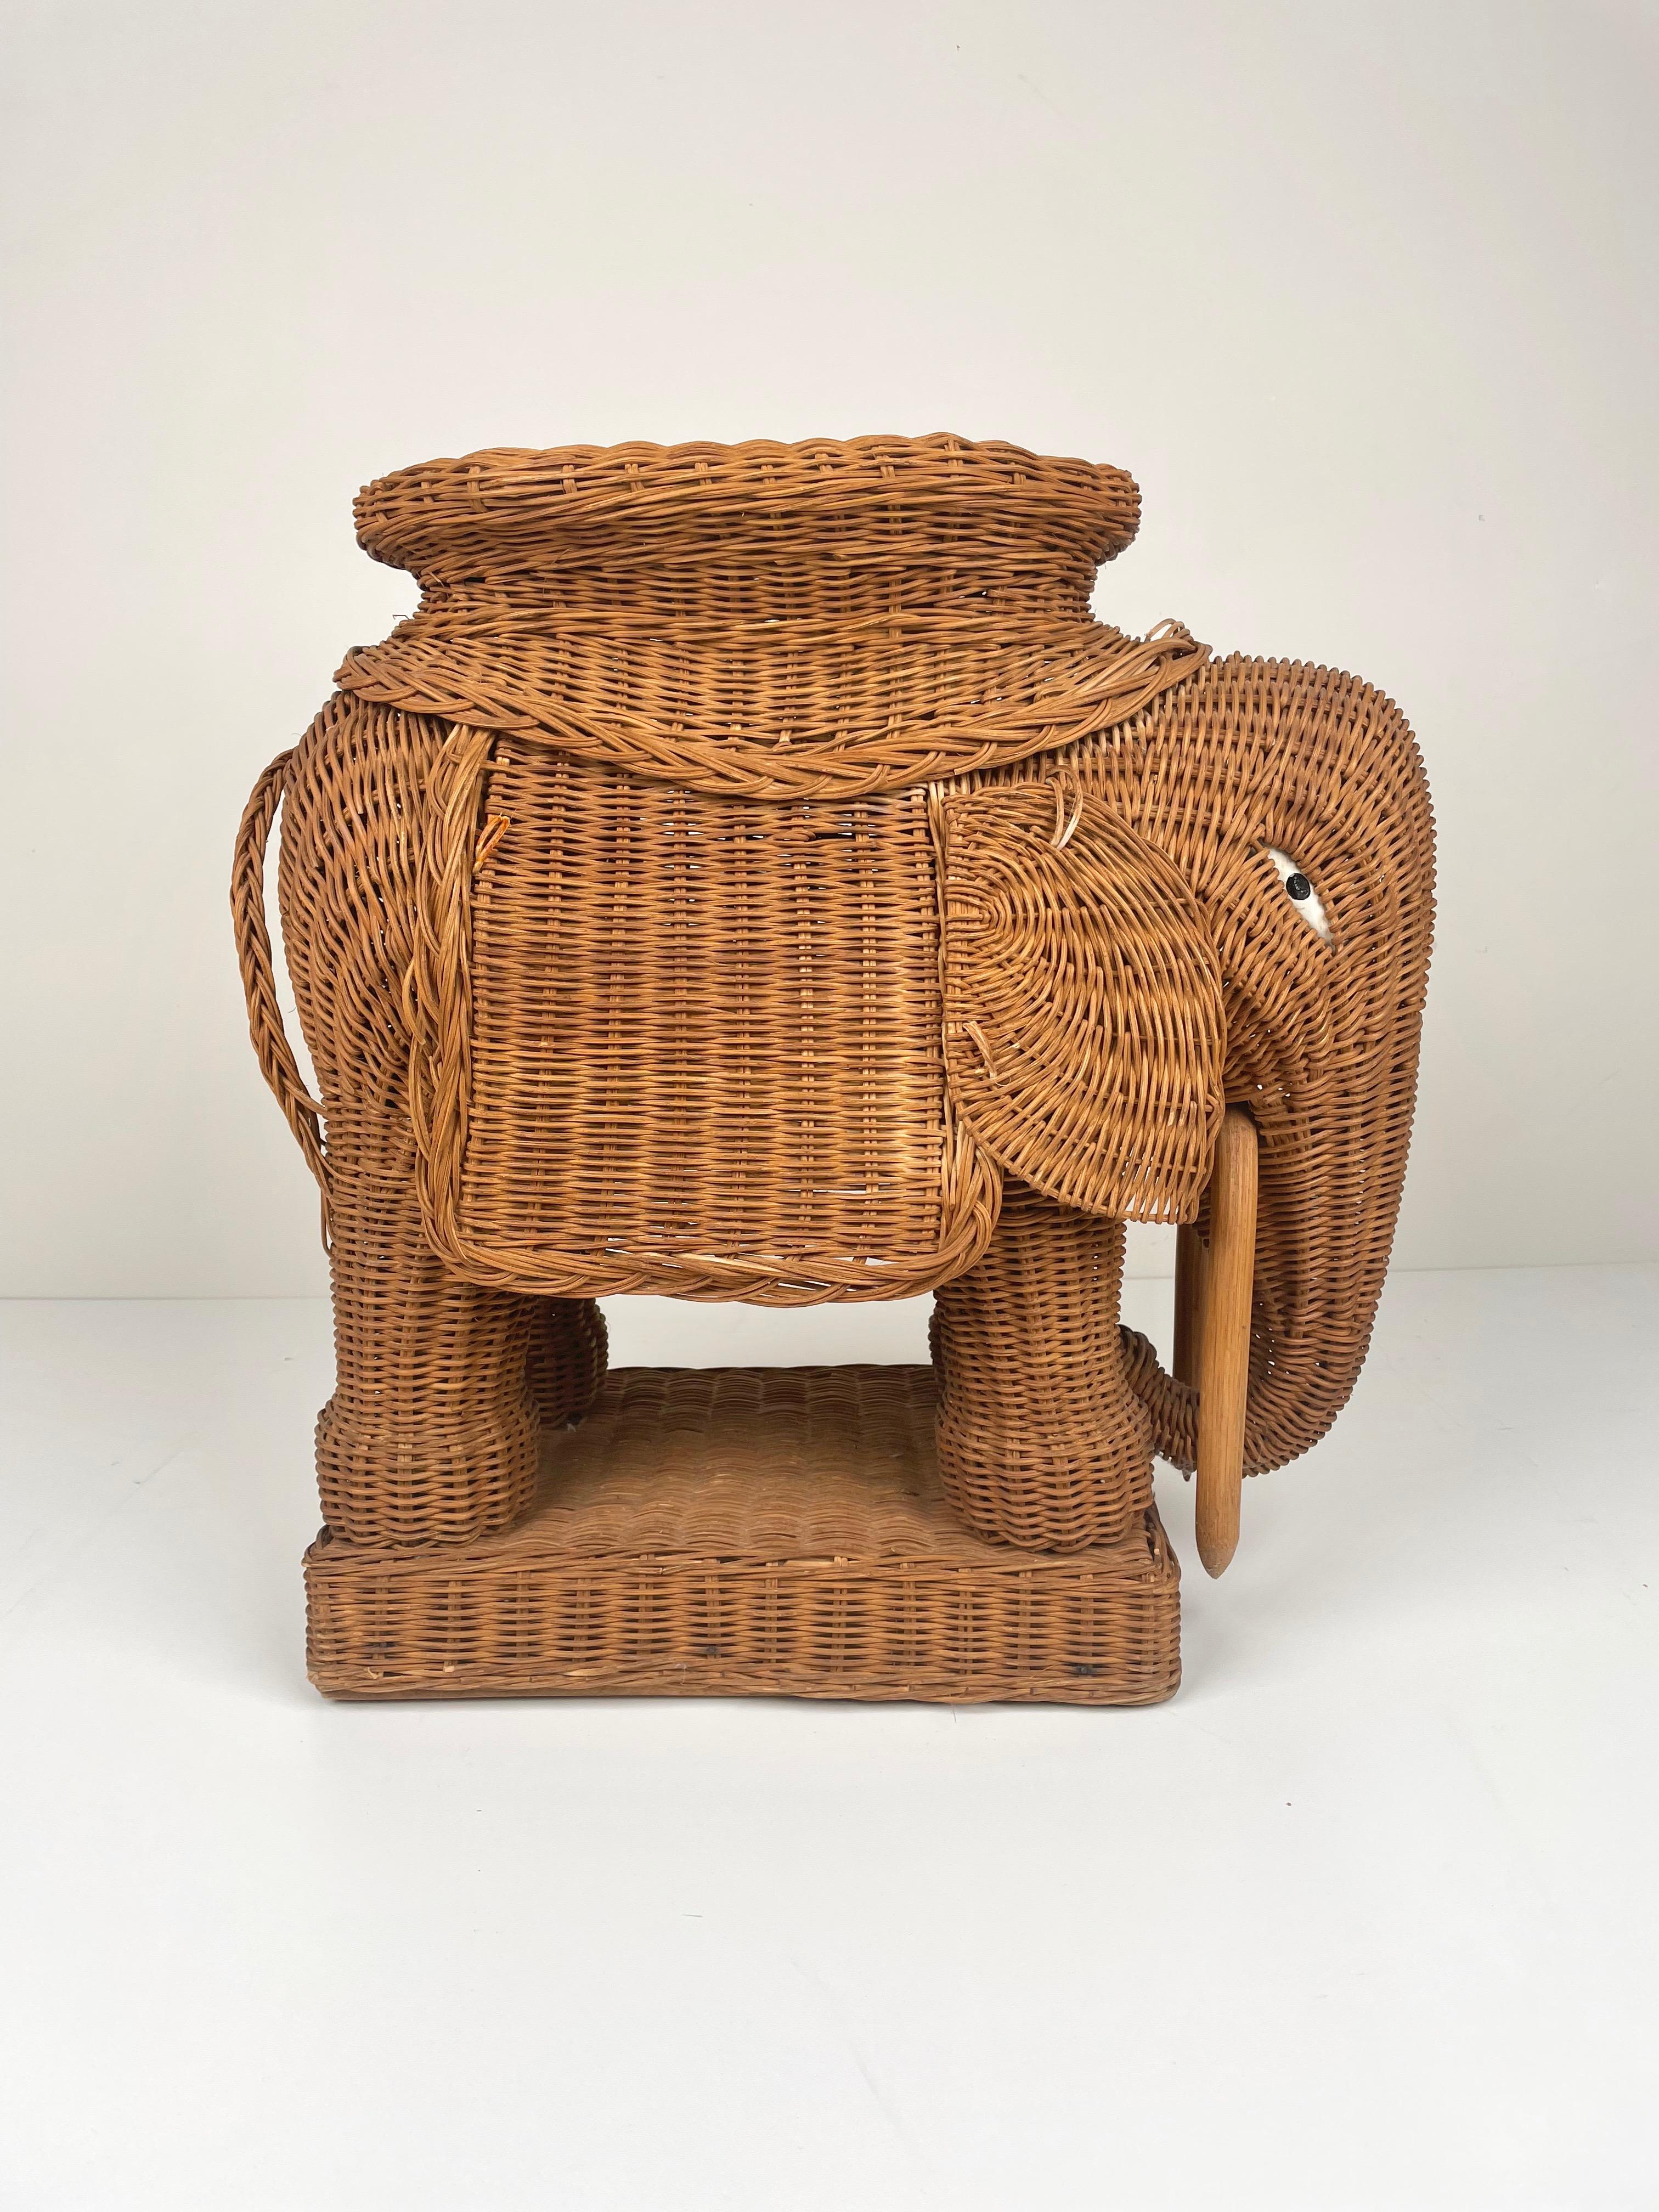 Elephant-shaped end coffee table in hand-braided rattan accented with wood tusks. Made in France, 1960s.